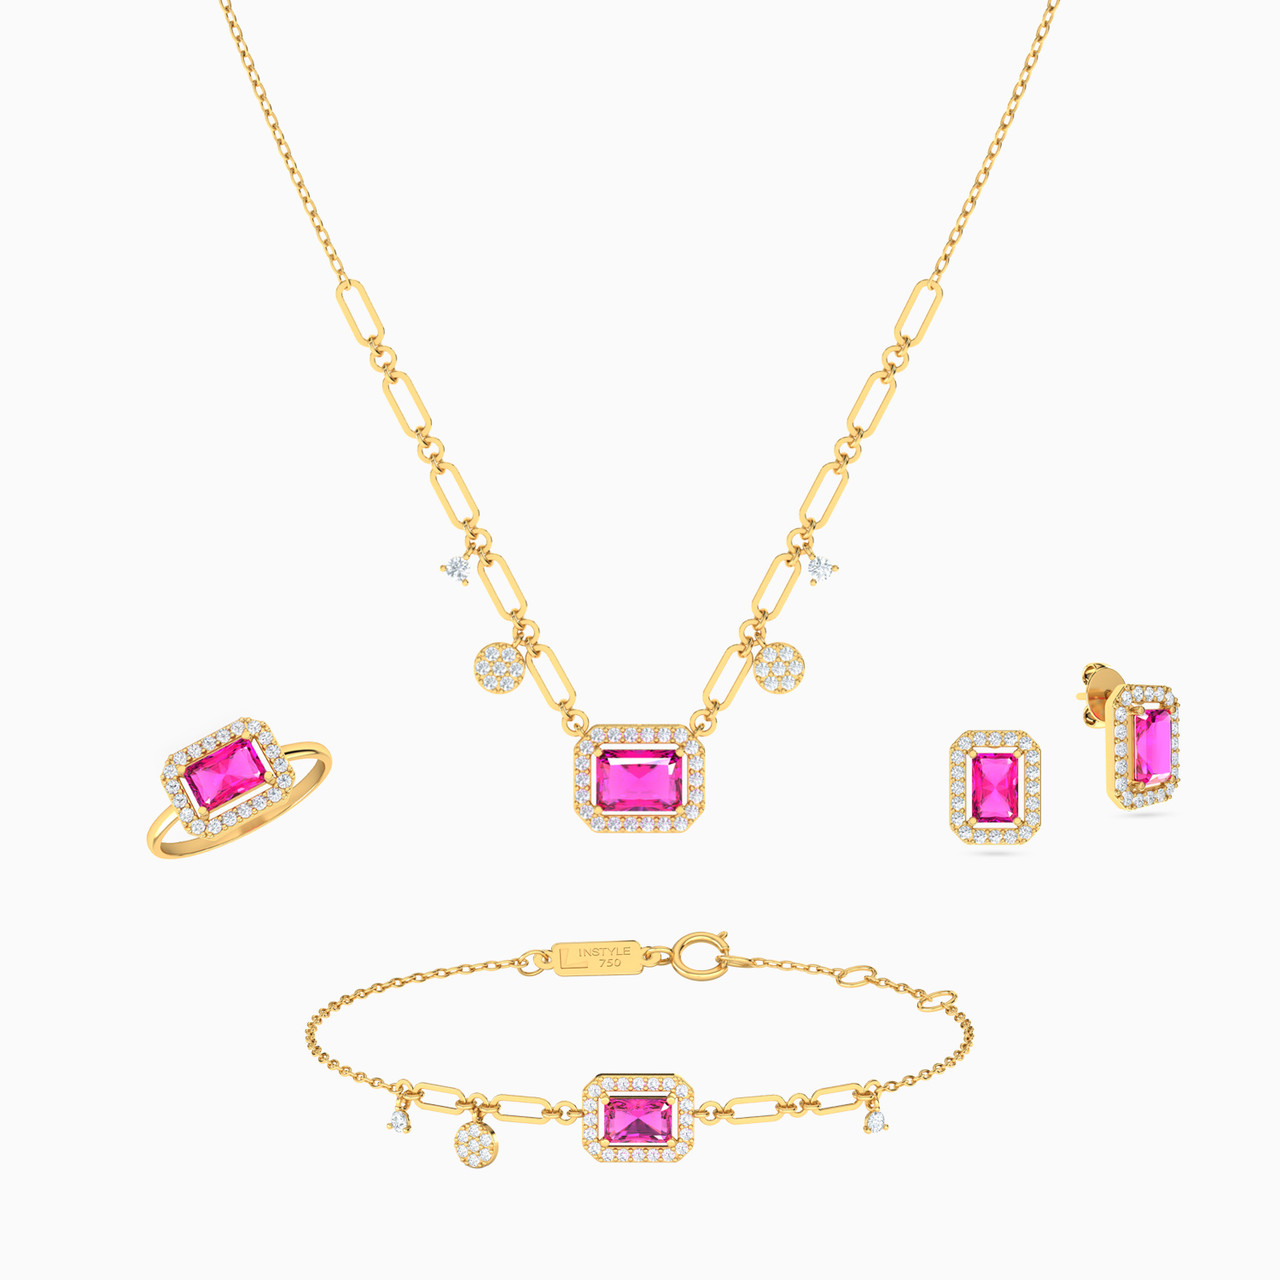 18K Gold Colored Stones Jewelry Set -4 Pieces